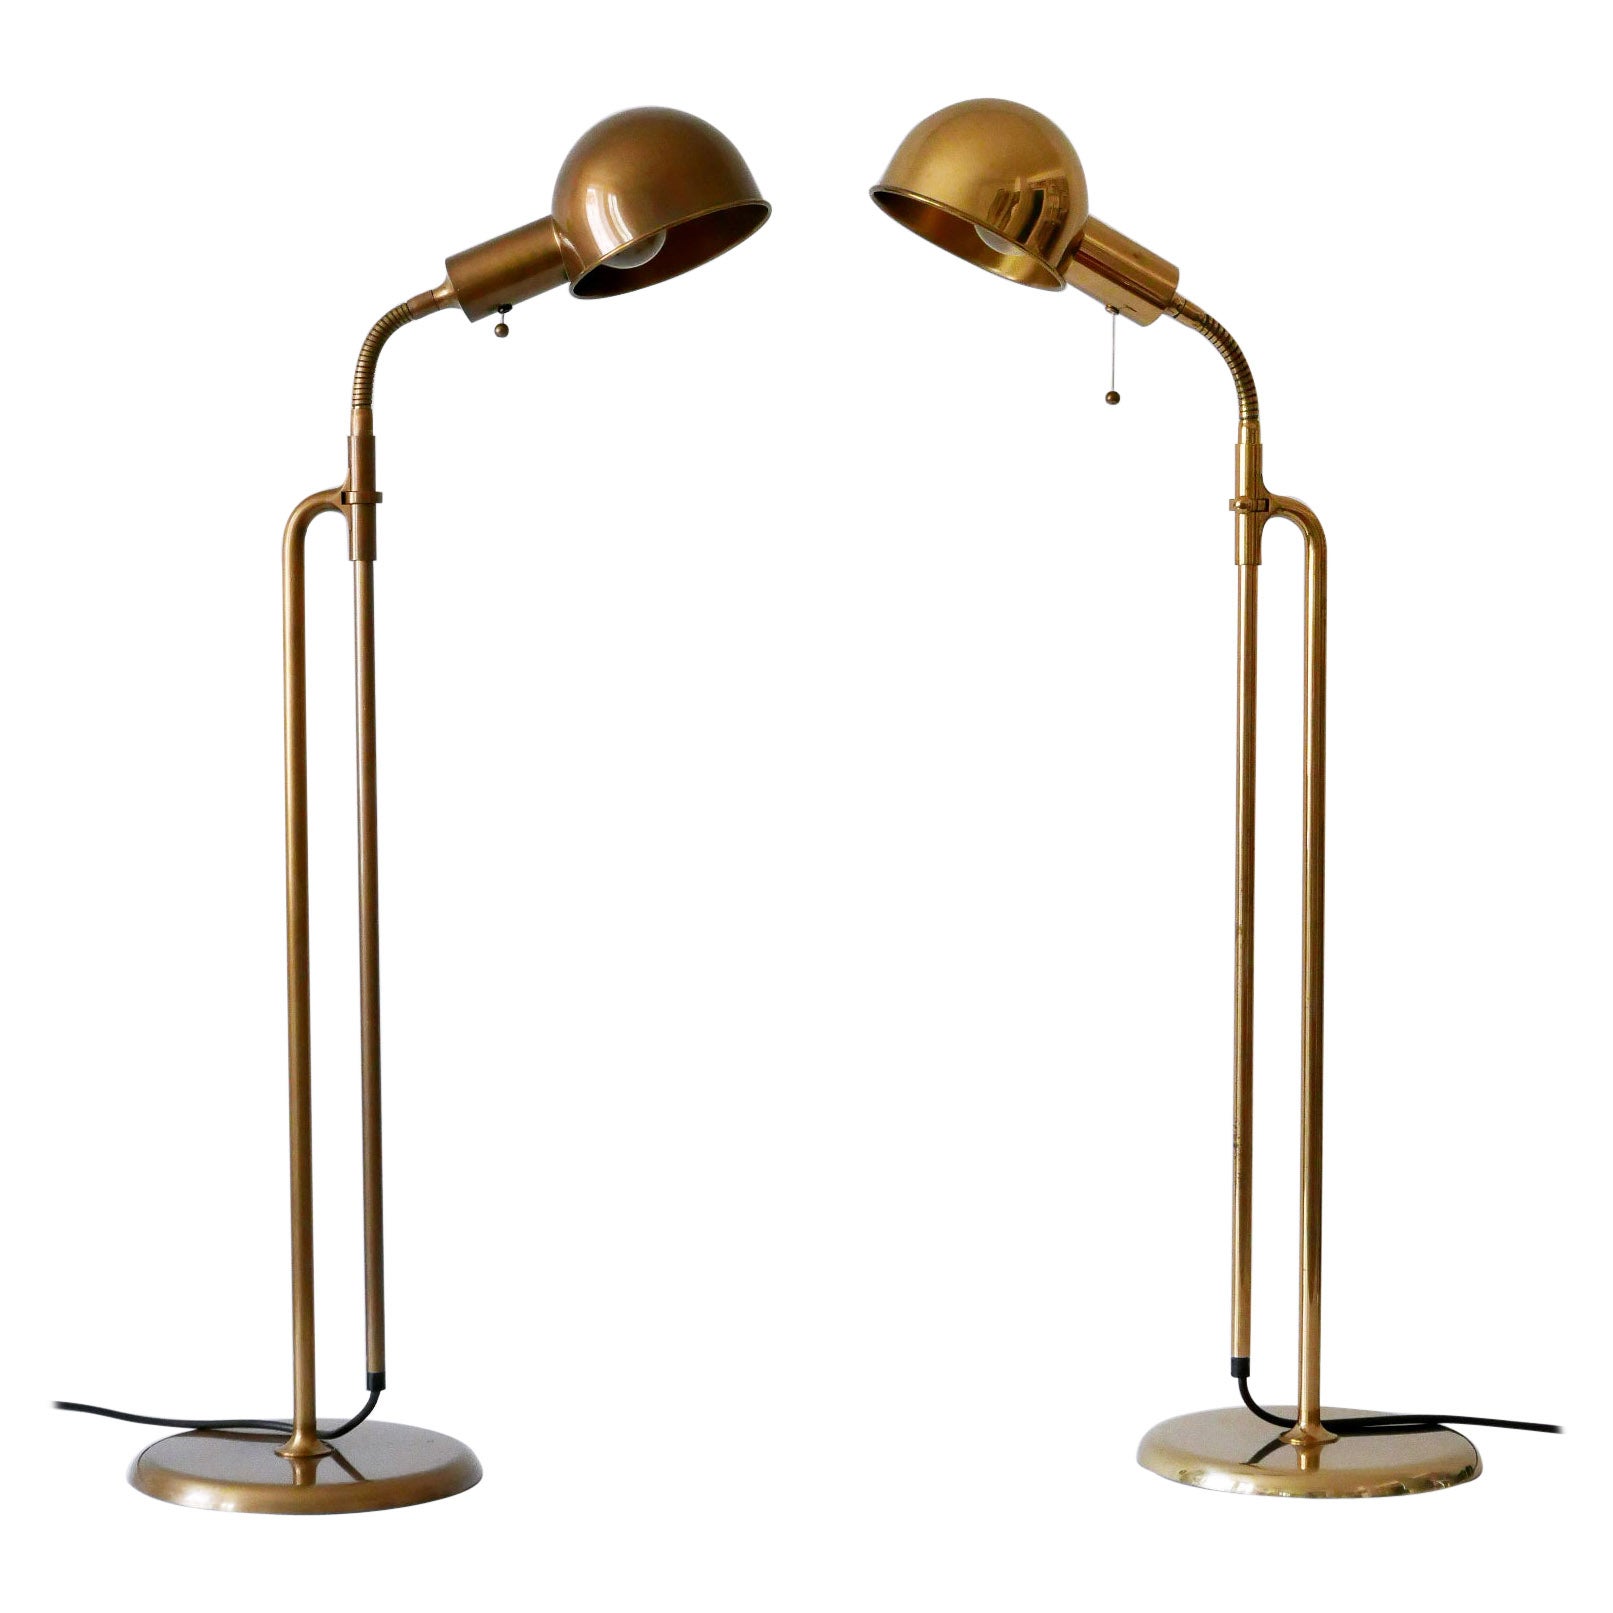 Set of Two Mid-Century Modern Reading Floor Lamps 'Bola' by Florian Schulz 1970s For Sale